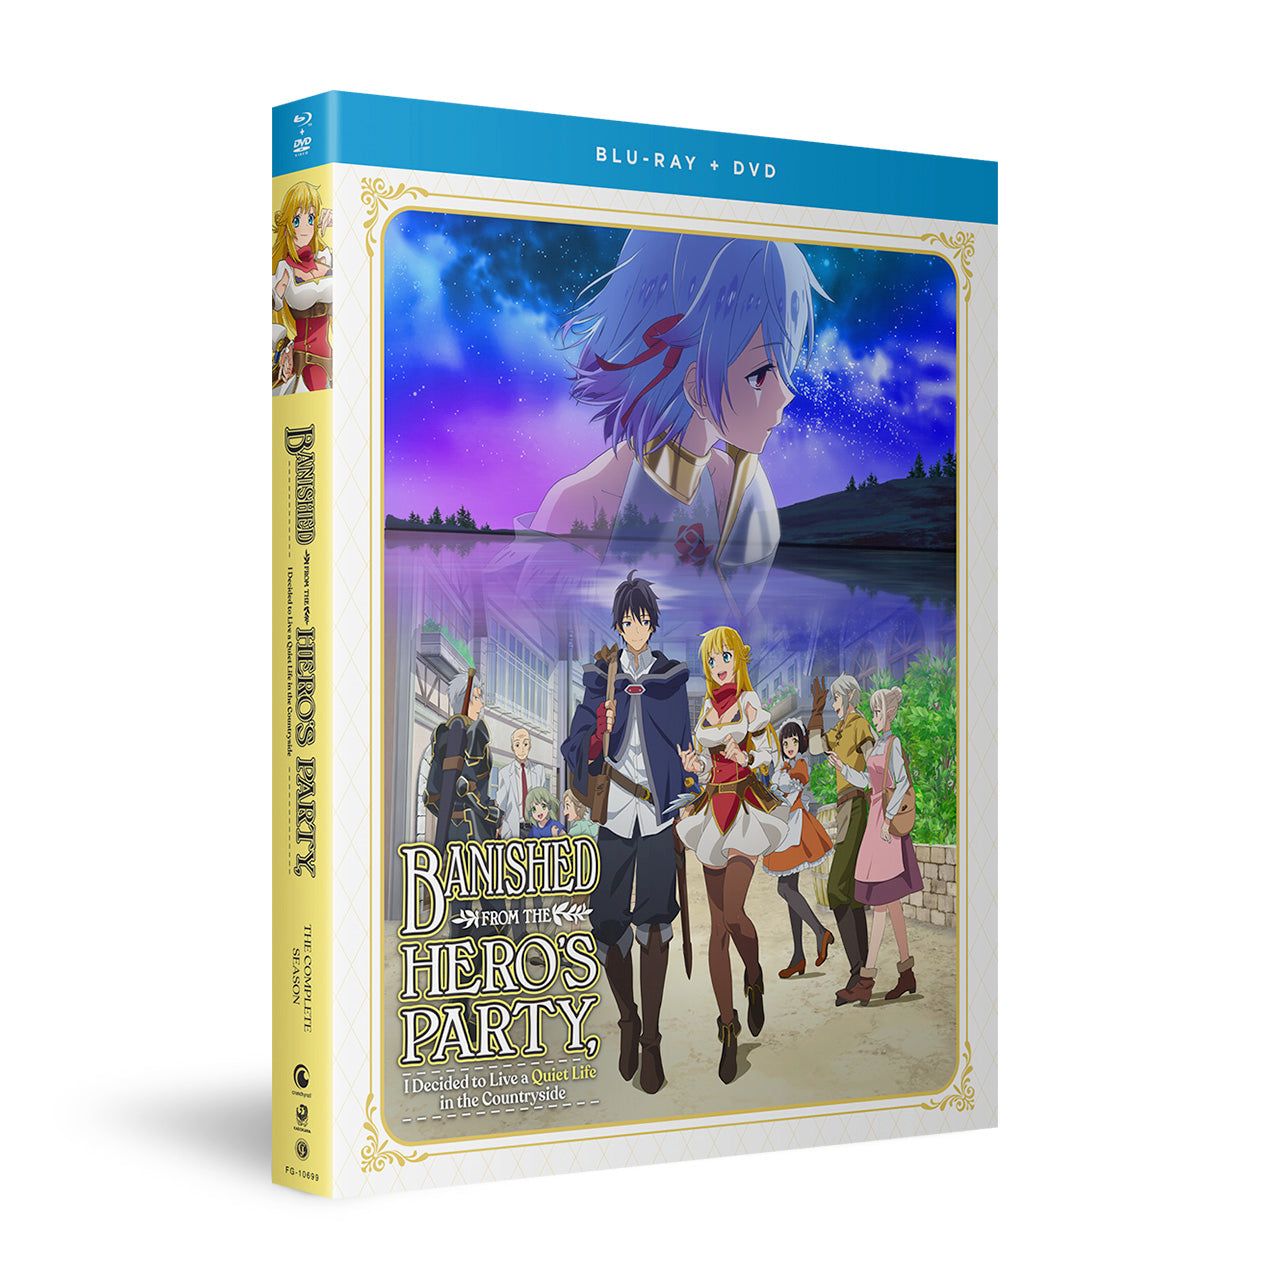 Banished from the Hero's Party I Decided to Live a Quiet Life in the Countryside - The Complete Season - Blu-ray + DVD image count 2